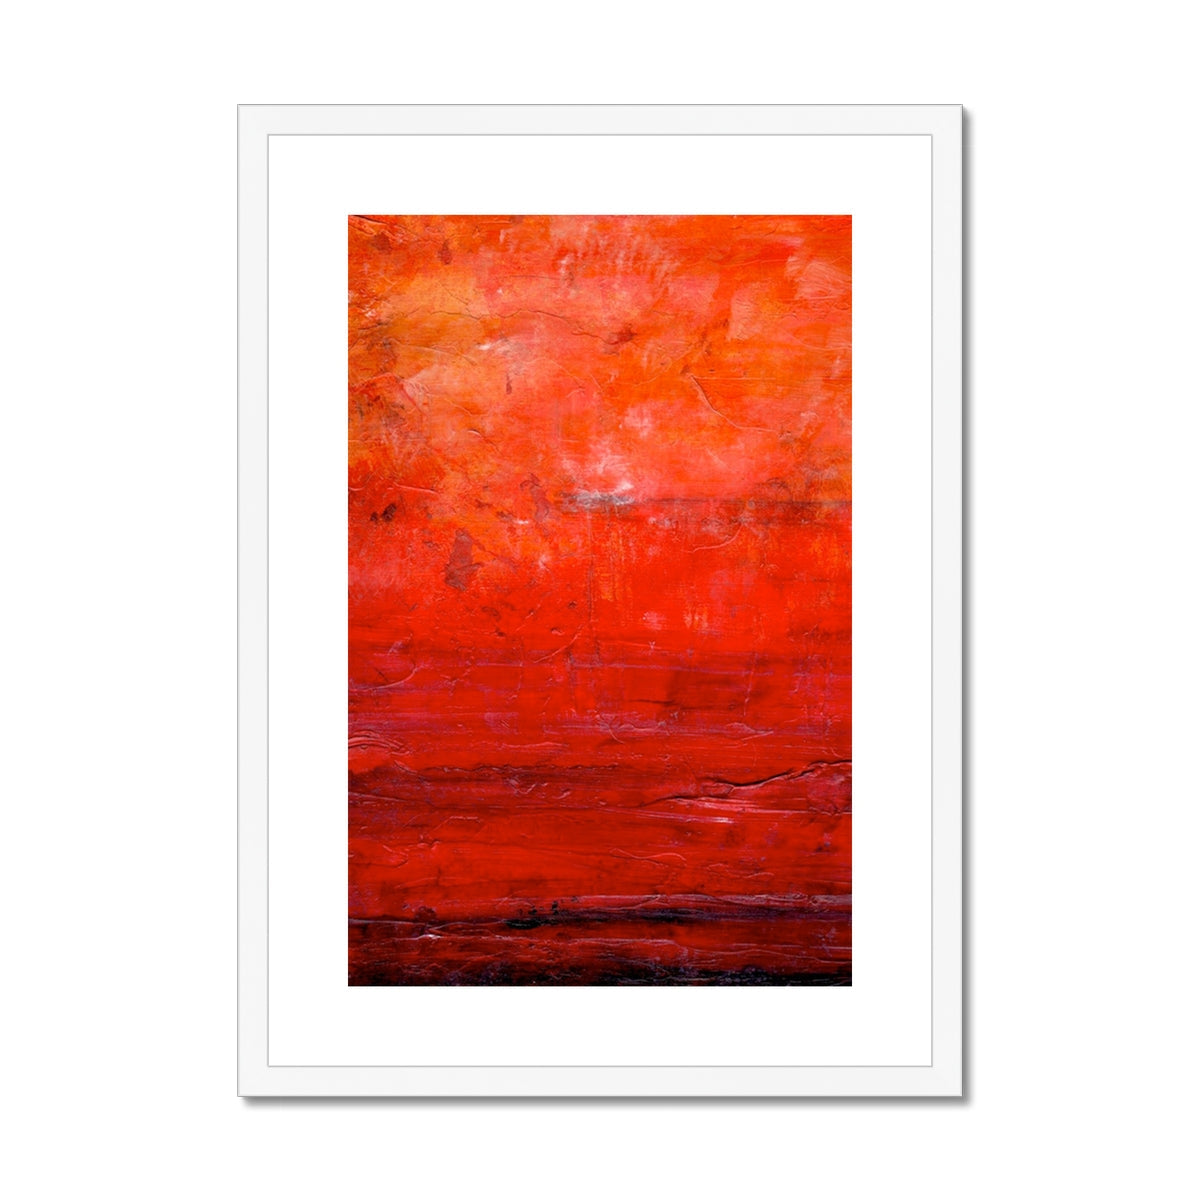 Abstract Summer Painting | Framed & Mounted Prints From Scotland-Framed & Mounted Prints-Abstract & Impressionistic Art Gallery-A2 Portrait-White Frame-Paintings, Prints, Homeware, Art Gifts From Scotland By Scottish Artist Kevin Hunter